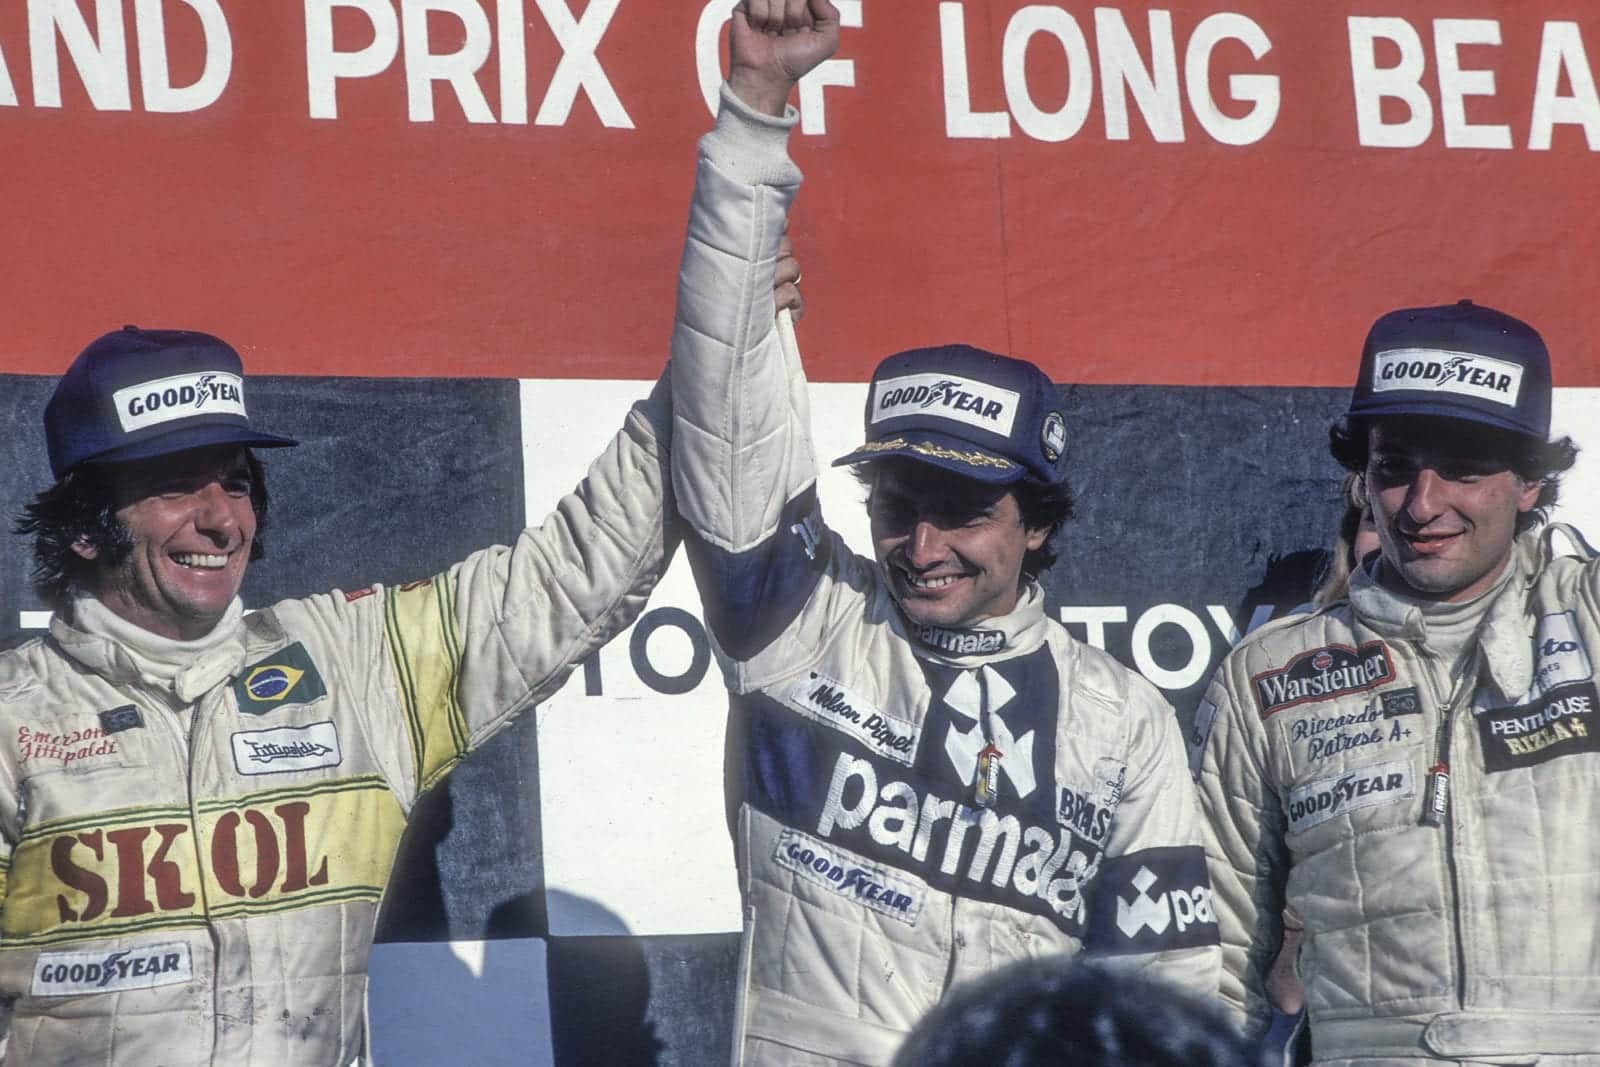 Nelson Piquet on the podium at Long Beach after winning his first F1 Grand Prix